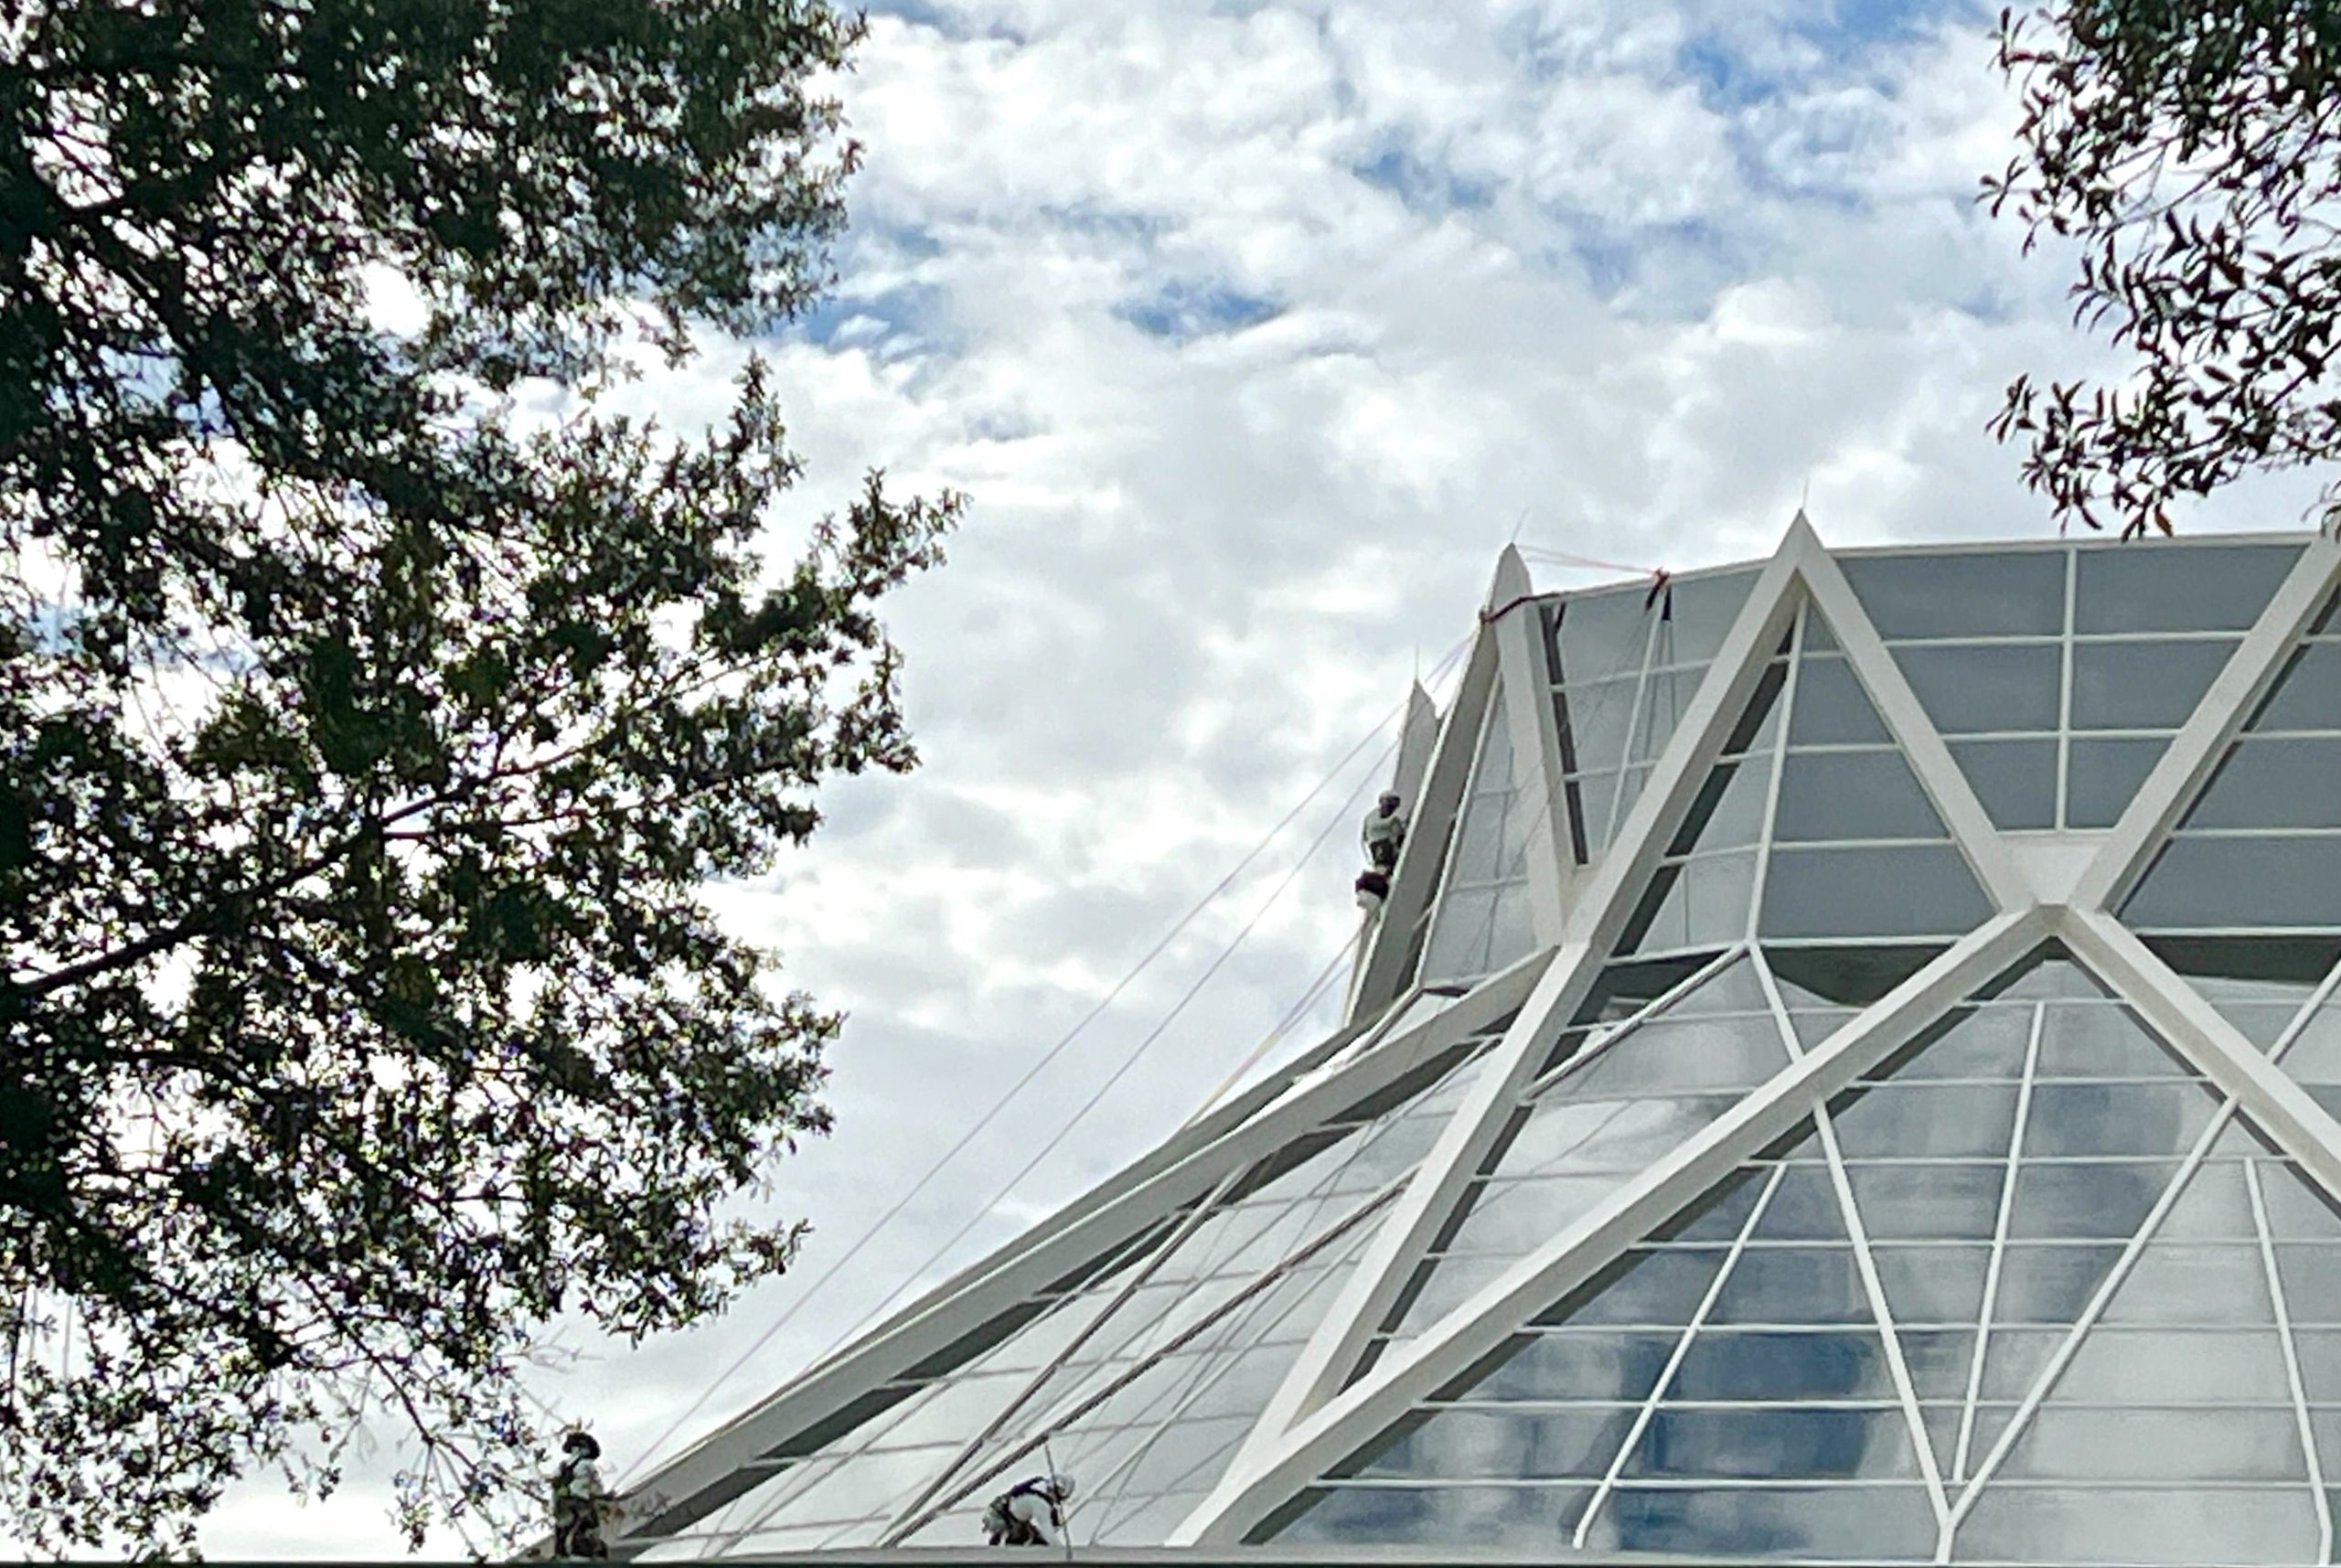 Construction Workers Scale the Roof at The Land Pavilion in EPCOT